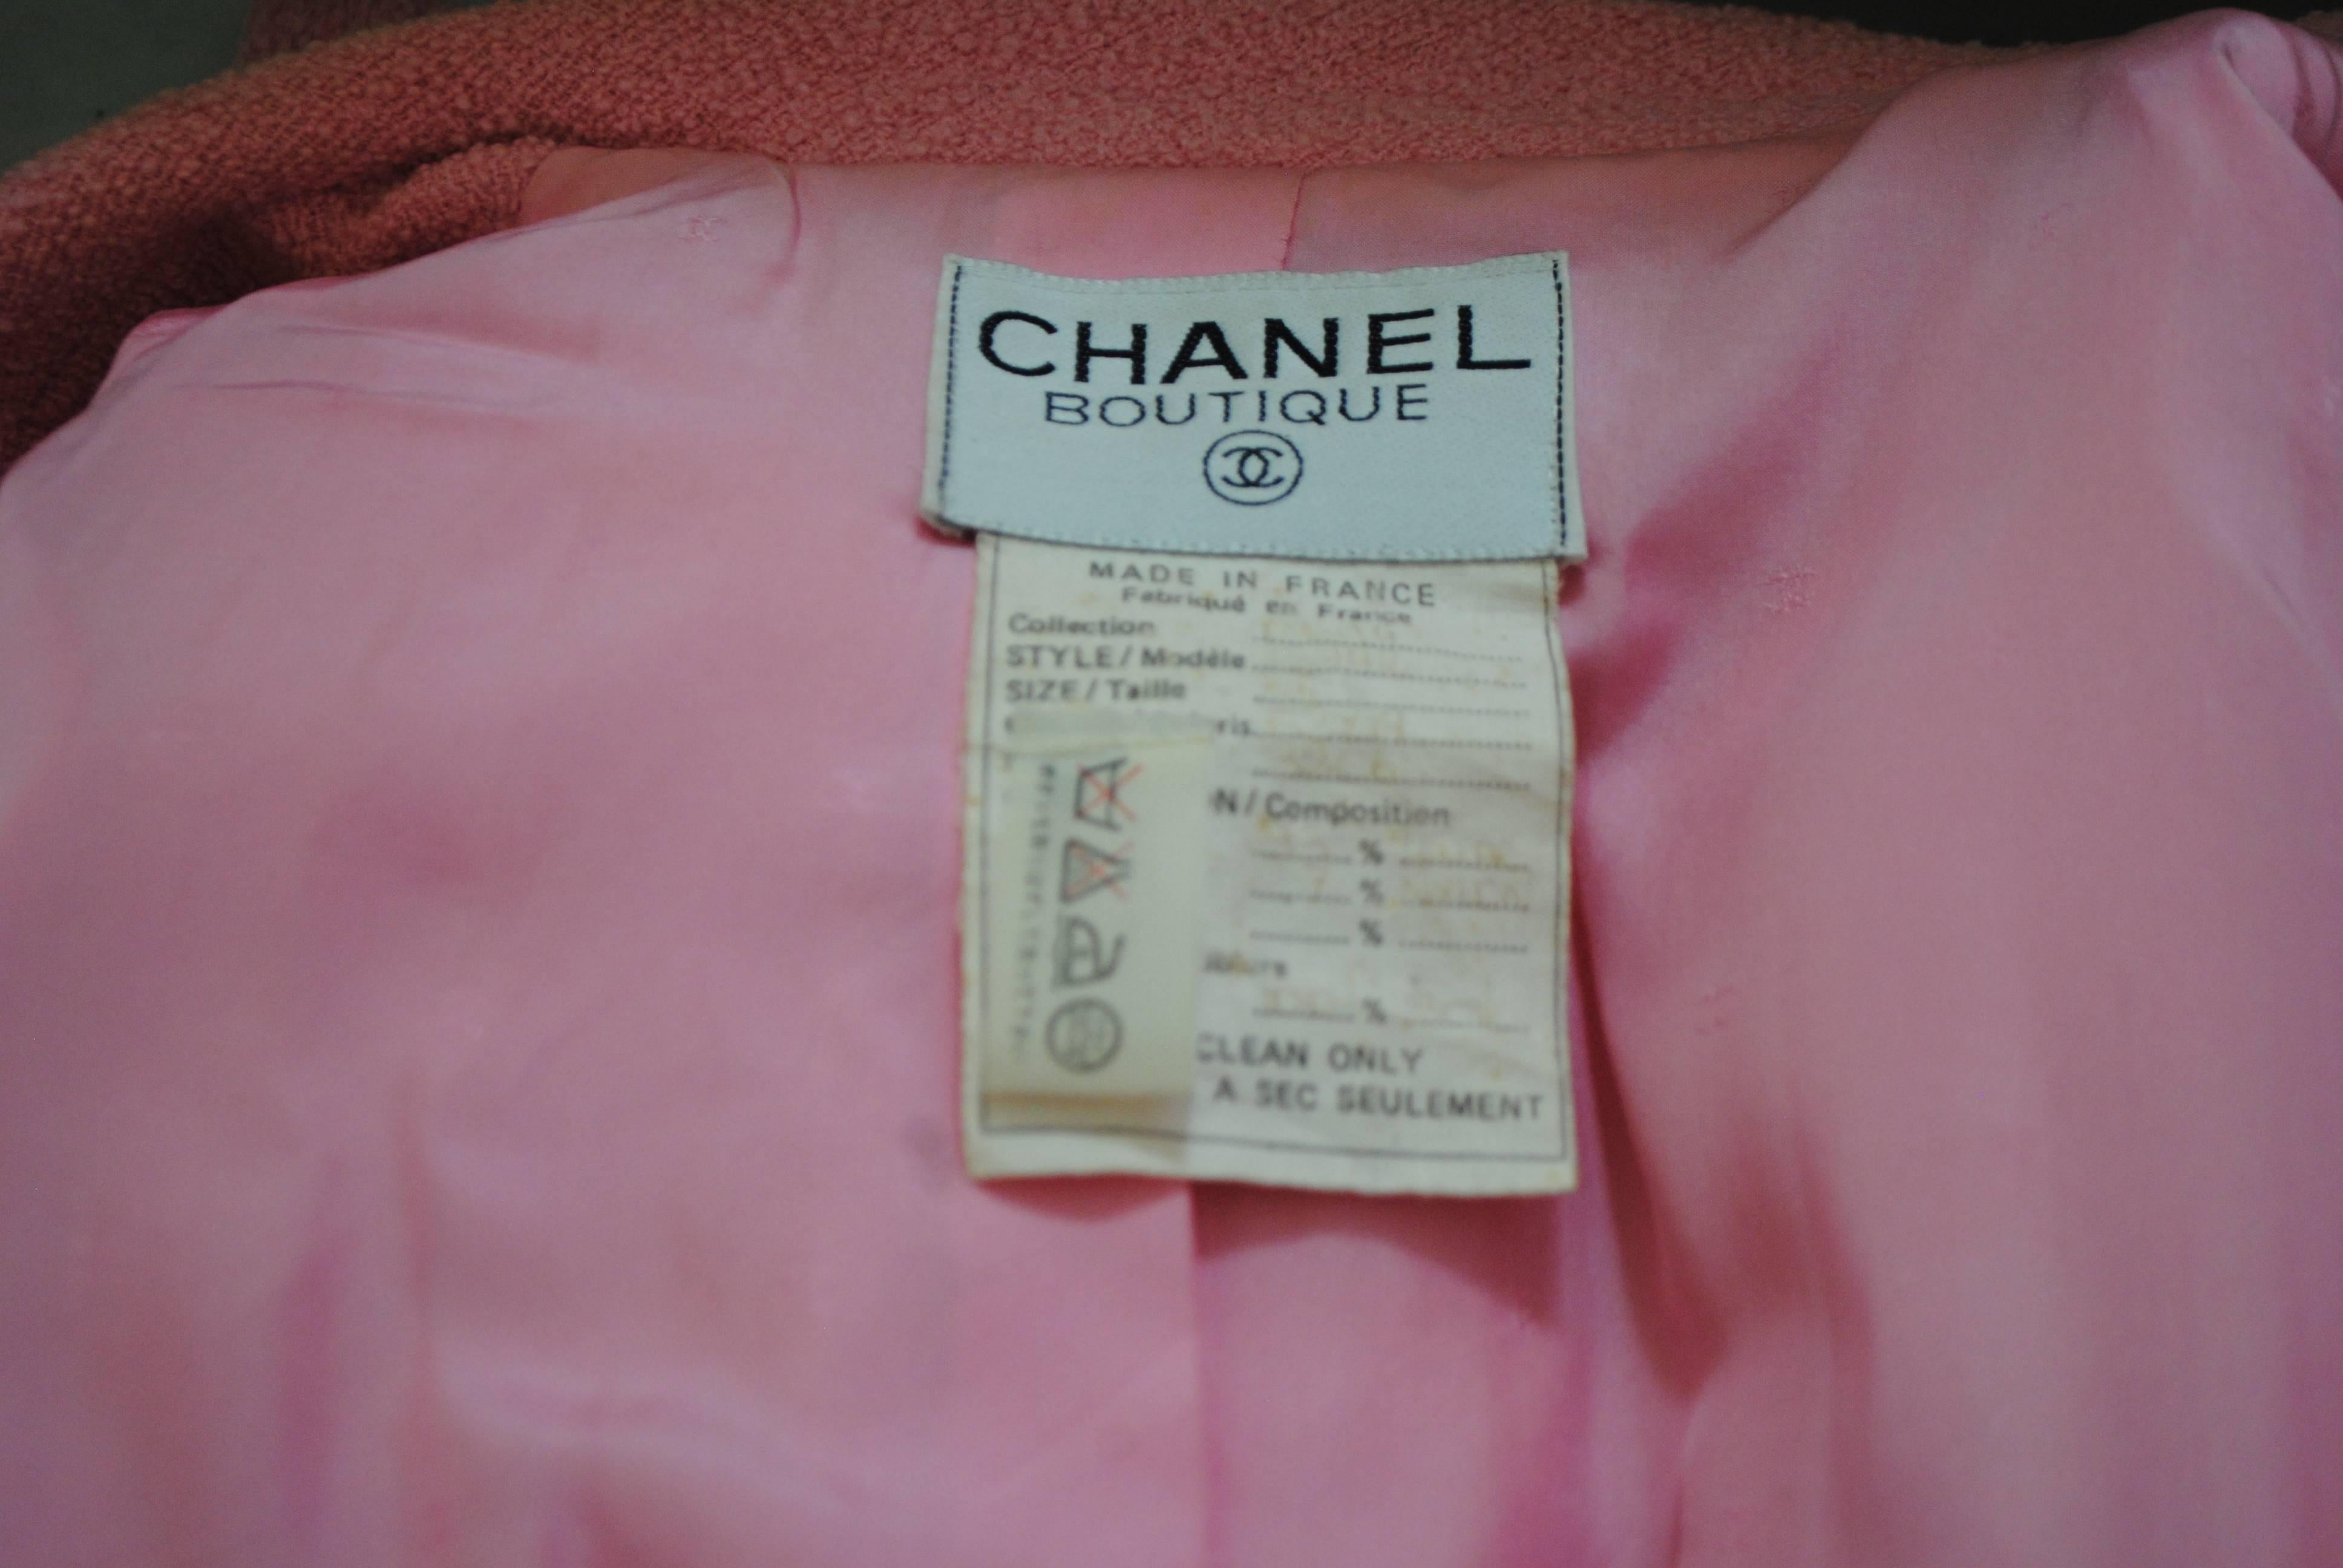 1992 Chanel Pink Boucle Wool Jacket
Chanel light pink jacket featurings 4 gold and pink tone bottons 
3 close to hem bottons
Totally made in france in size 36 which corresponds to an italian size 40
Composition: Wool
Gold tone chain in the lining